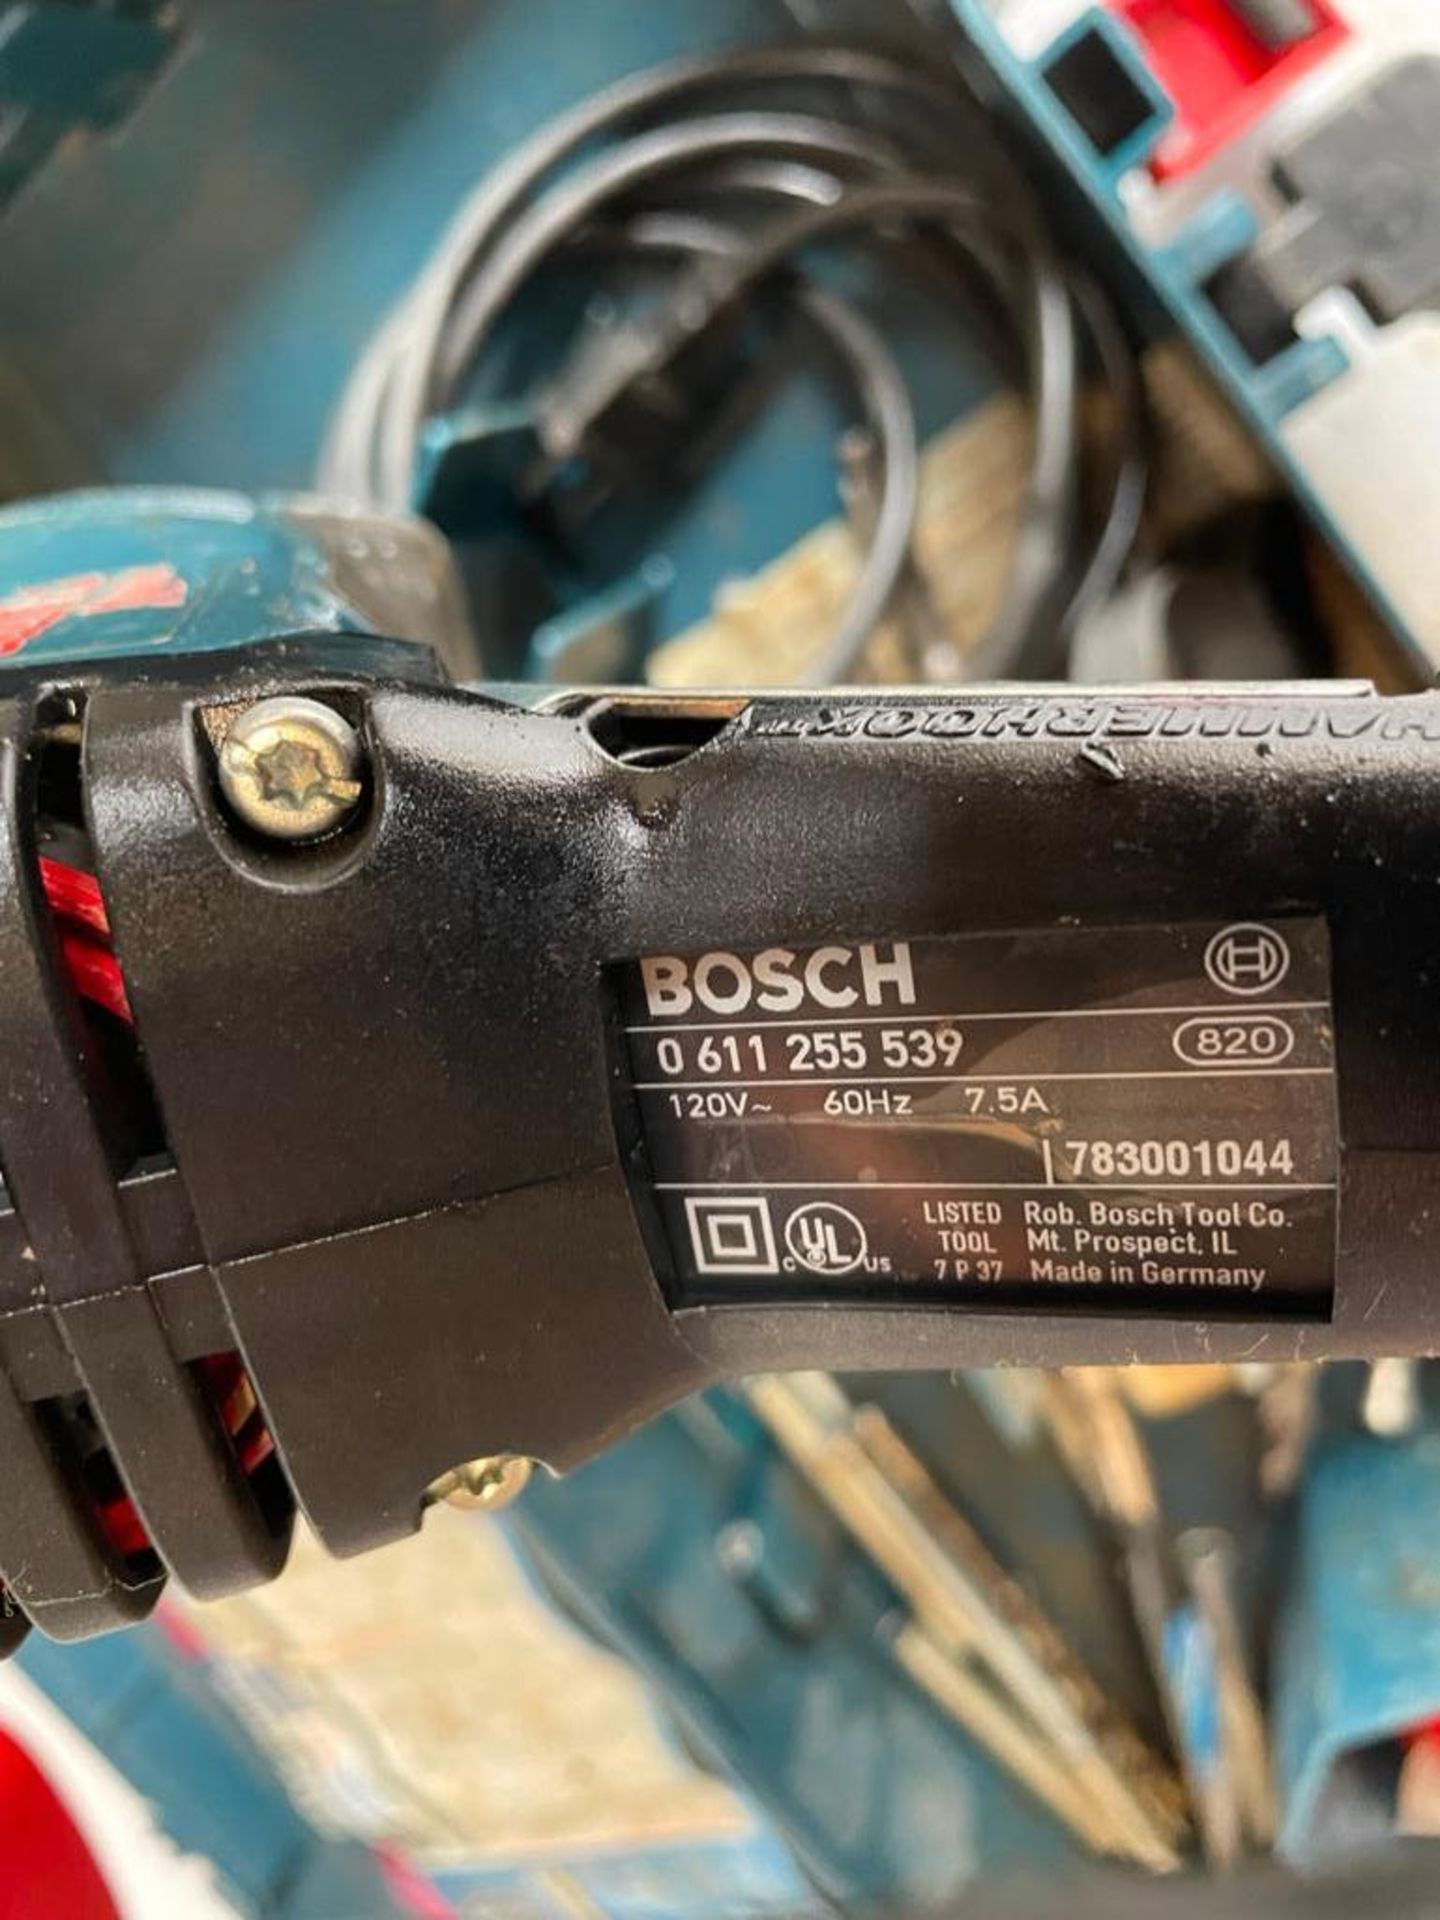 Bosch Bulldog Xtreme Variable Speed Hammer Drill, 120 V. Located in Hazelwood, MO - Image 5 of 6